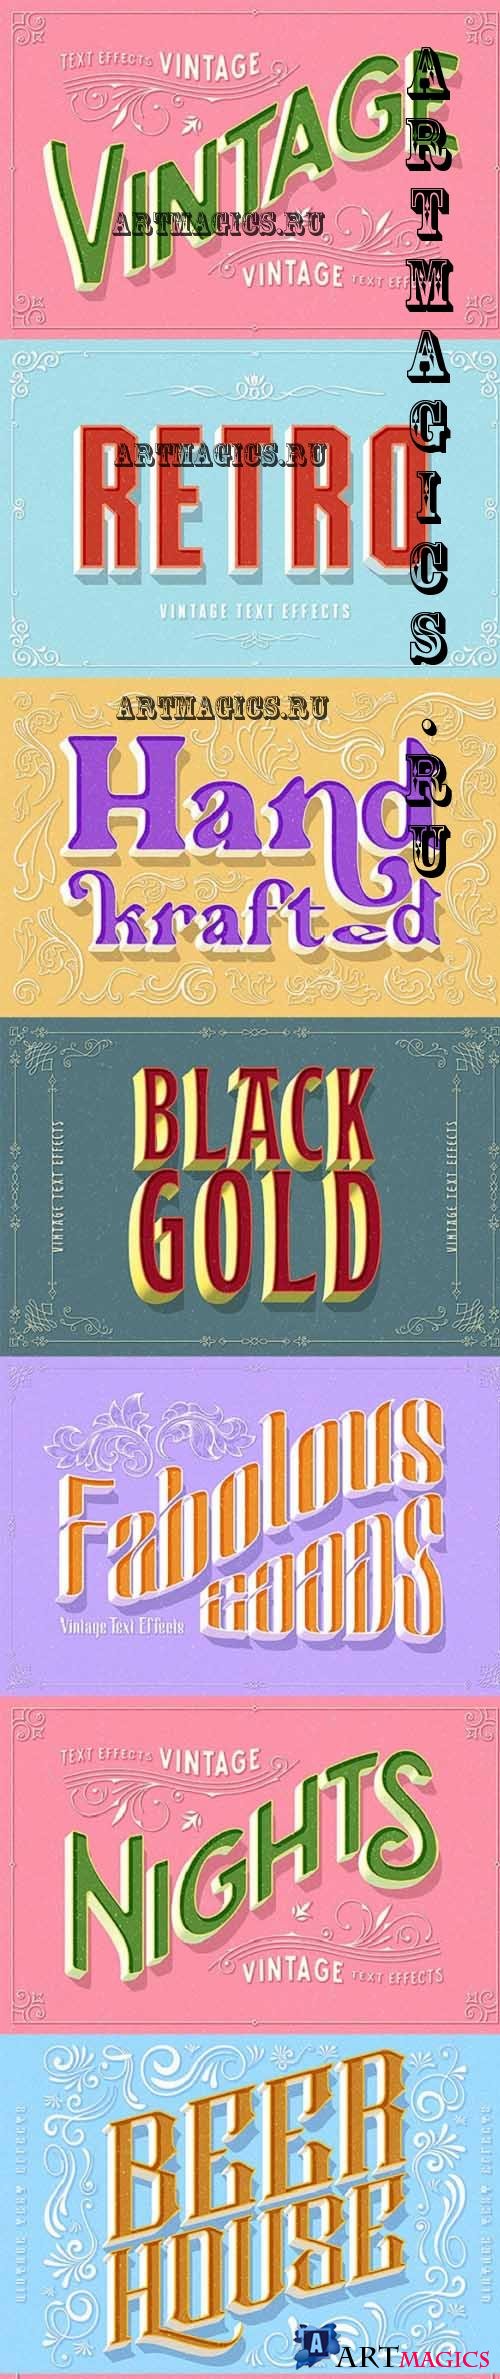 Graphicriver - Vintage Text Effects - 36352513